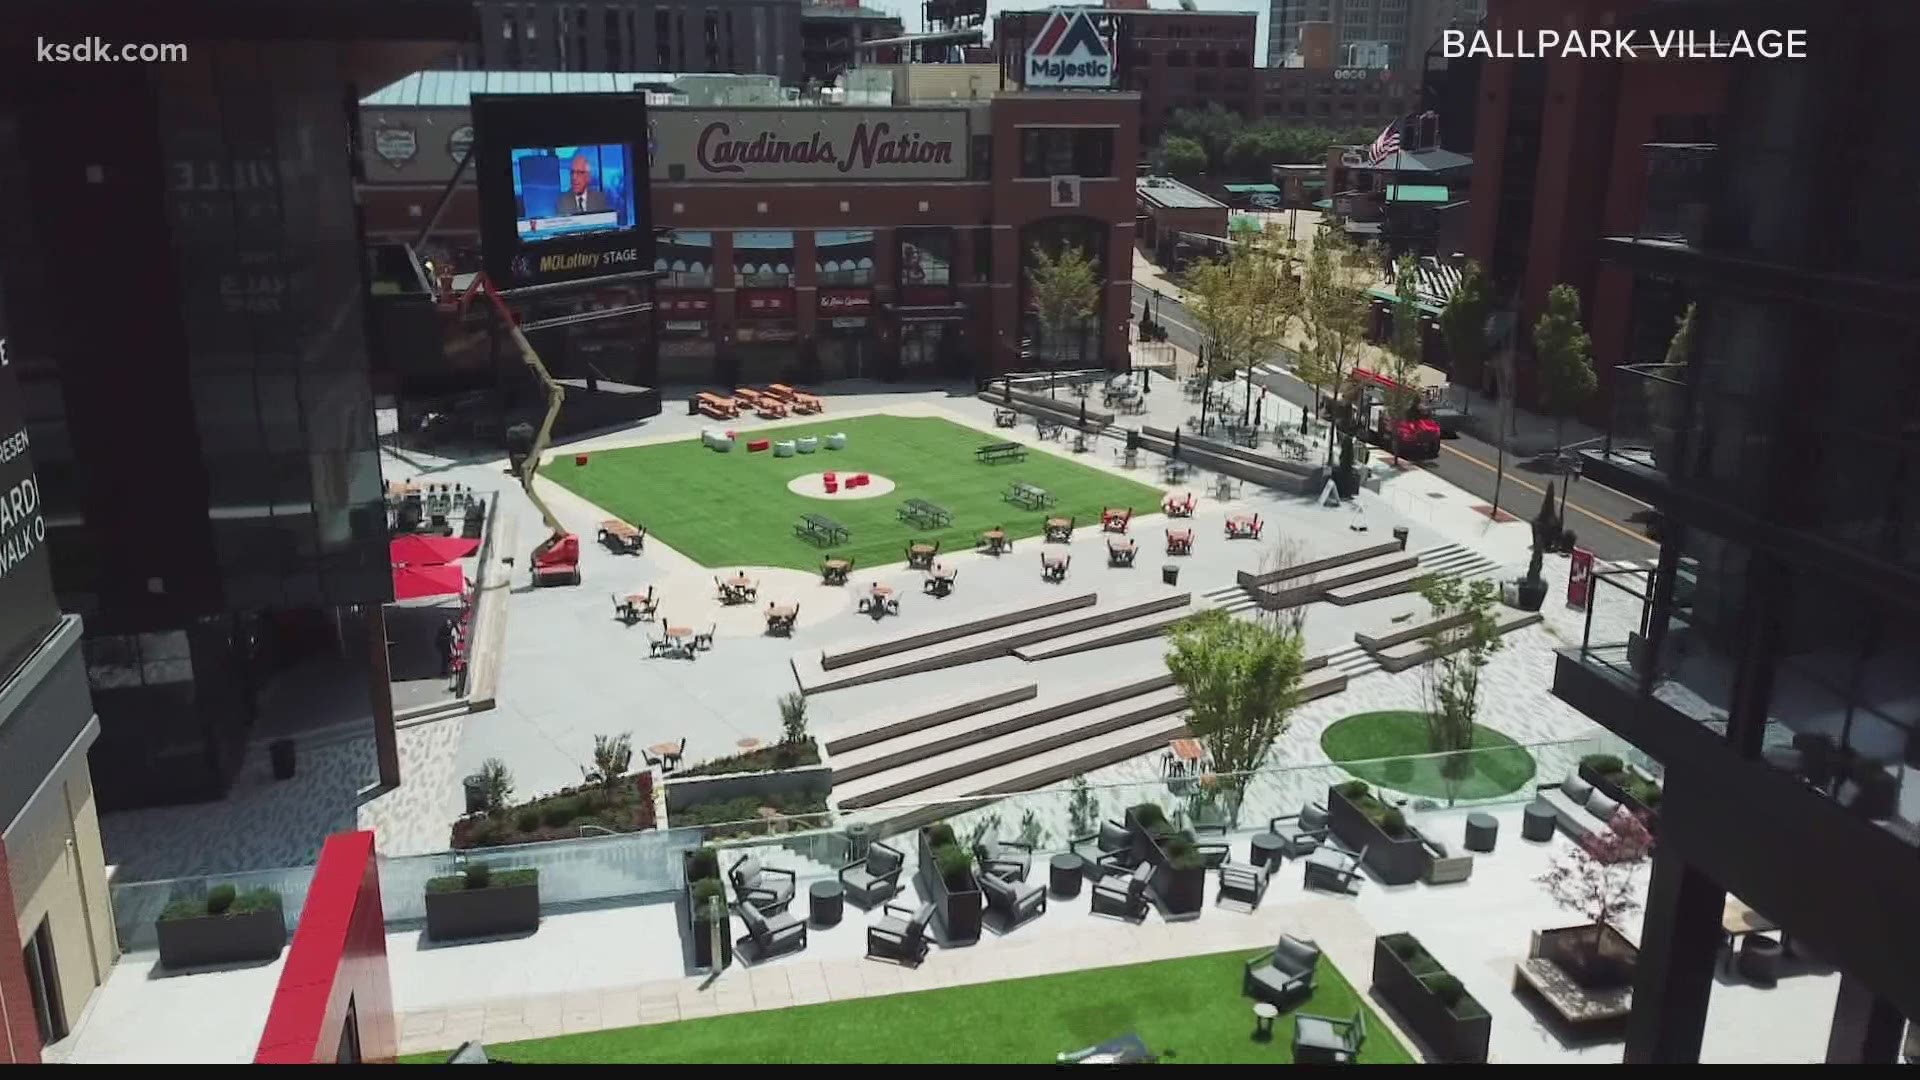 Show Me St. Louis caught up with Chief Operating Officer of Ballpark Village, Mike LaMartina, ahead of the home opener.